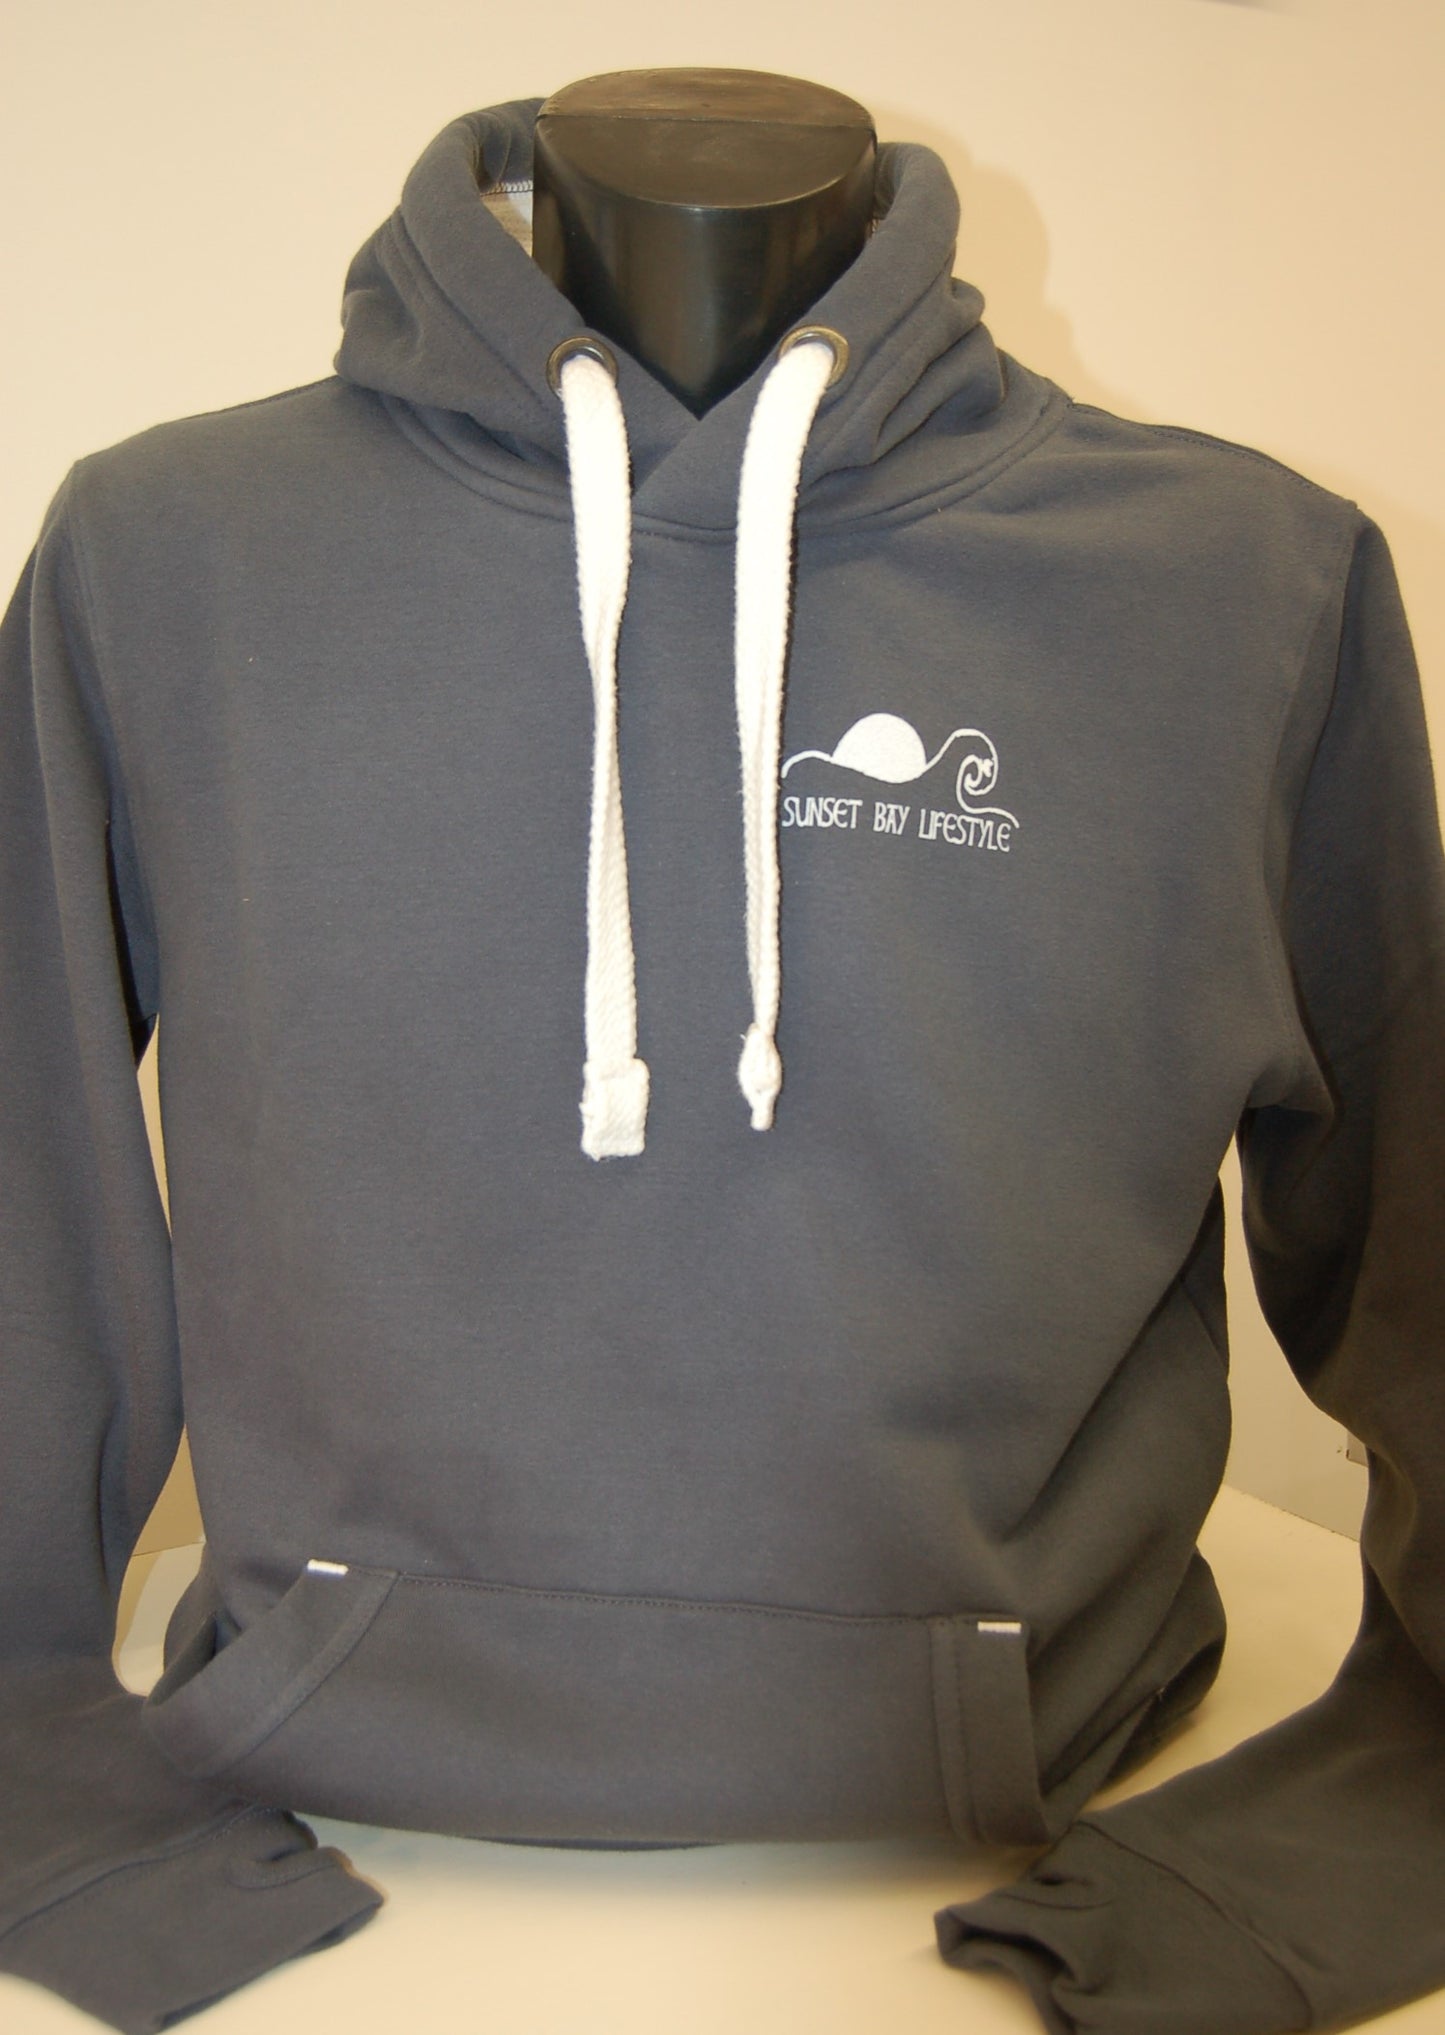 Barmouth Retro Surfer Print Unisex Adult Hoody in Charcoal Grey